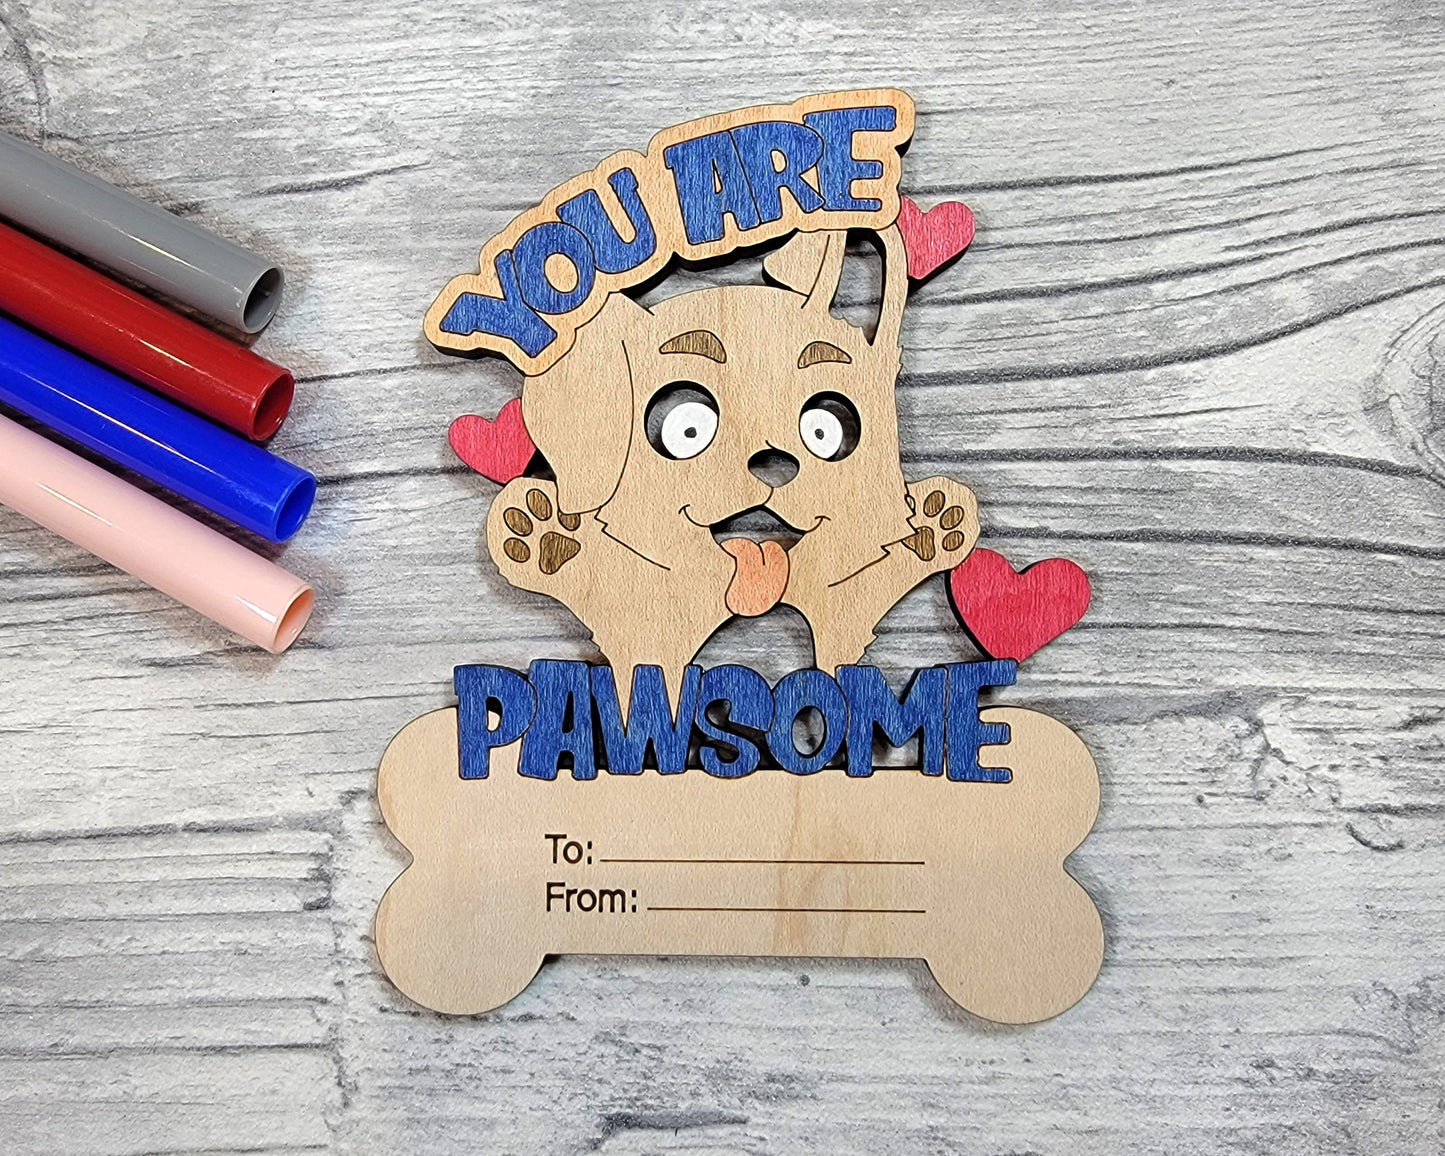 Valentines DIY Lovable Pet Paint Card Craft - SVG File Download - Sized & Tested on Glowforge